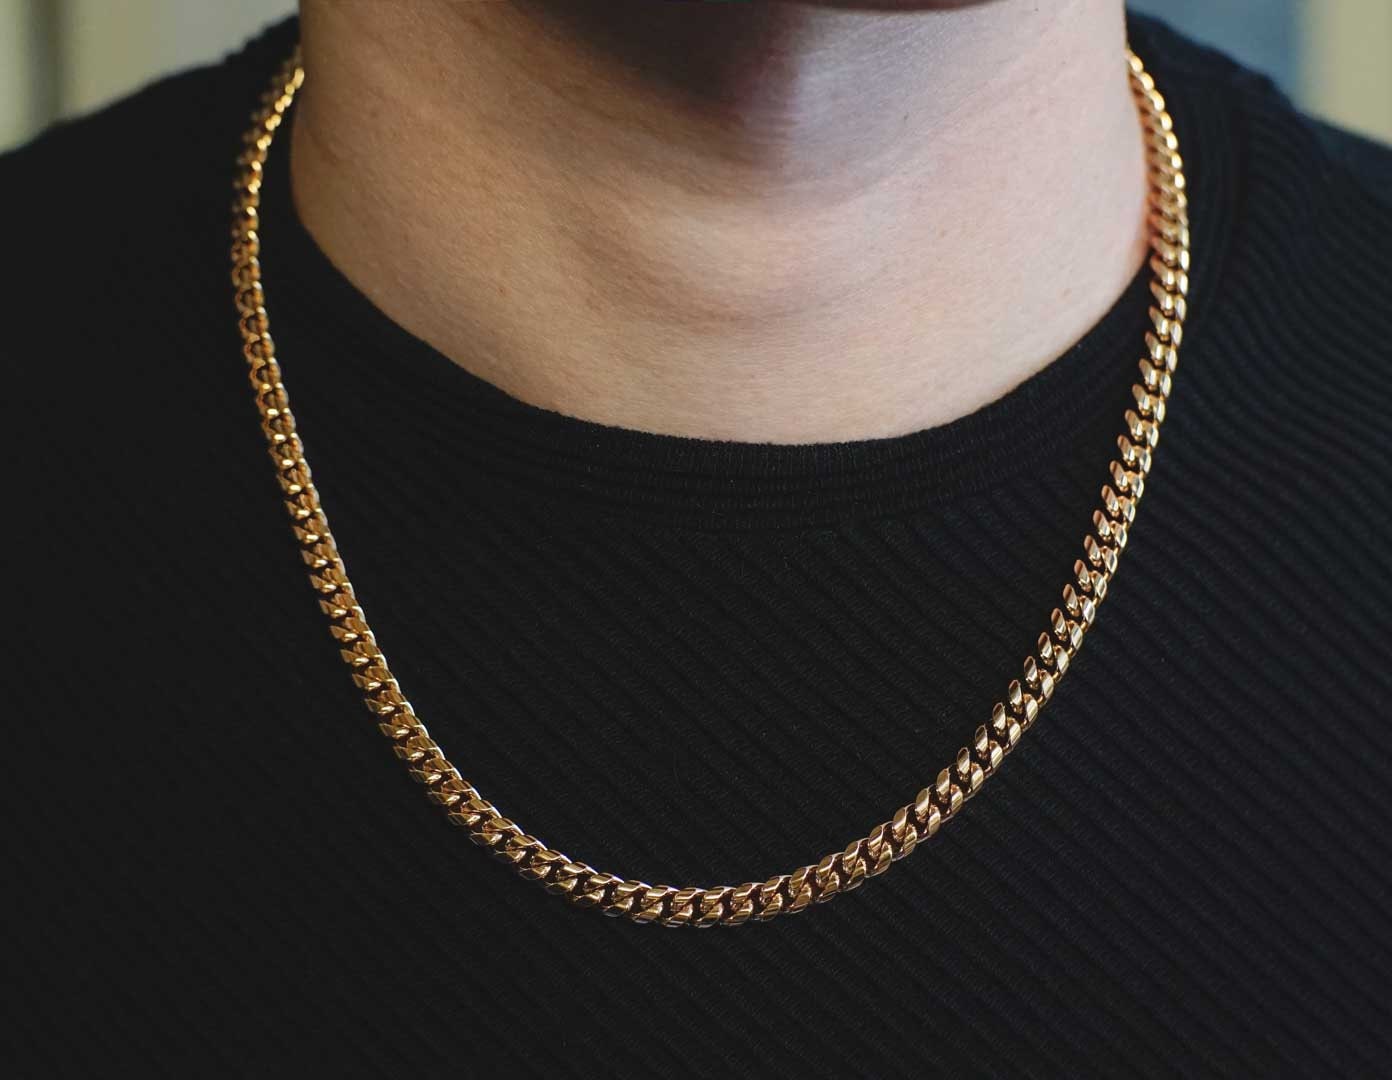 Stylish Stainless Steel Cuban Link Chain Mens Gold Chain Necklace For Women  Gold Color, 6mm 10mm Width, Clavicalis Choker Jewelry From Atunice, $9.8